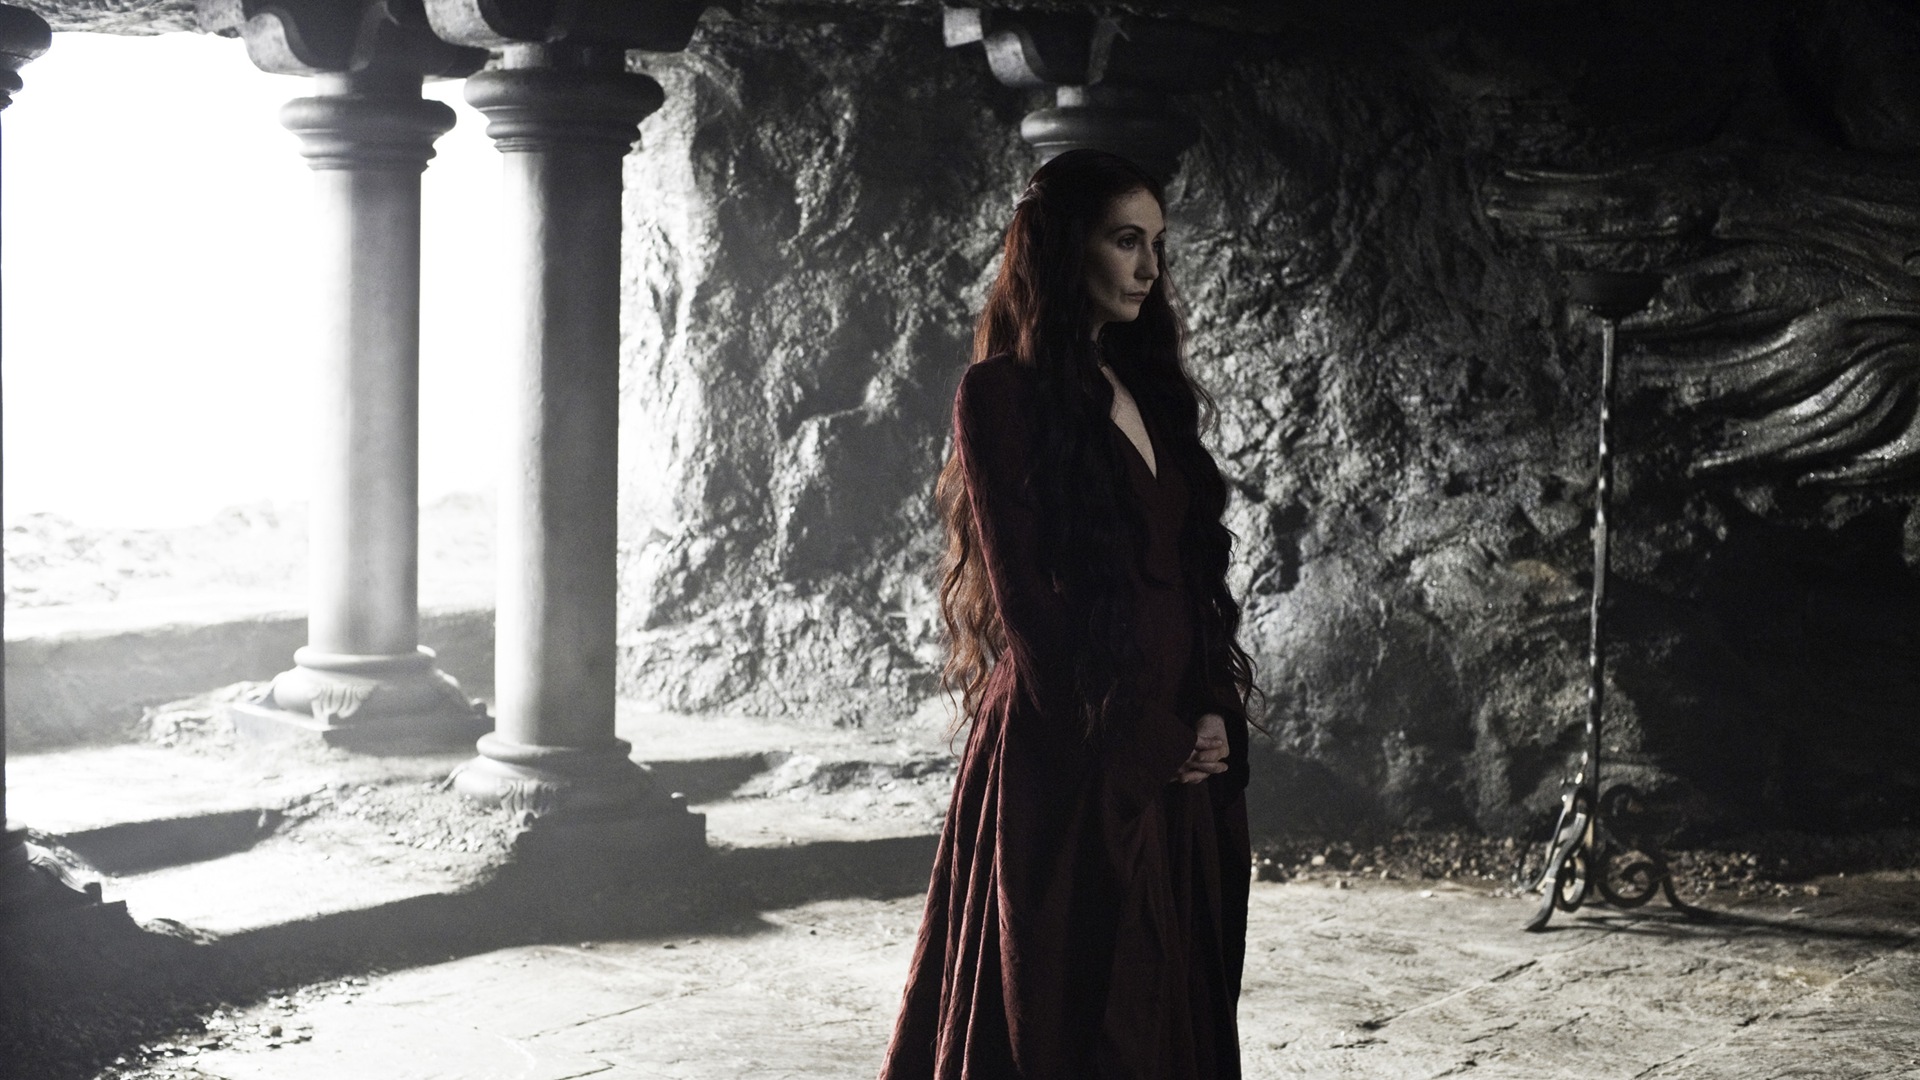 A Song of Ice and Fire: Game of Thrones HD wallpapers #34 - 1920x1080